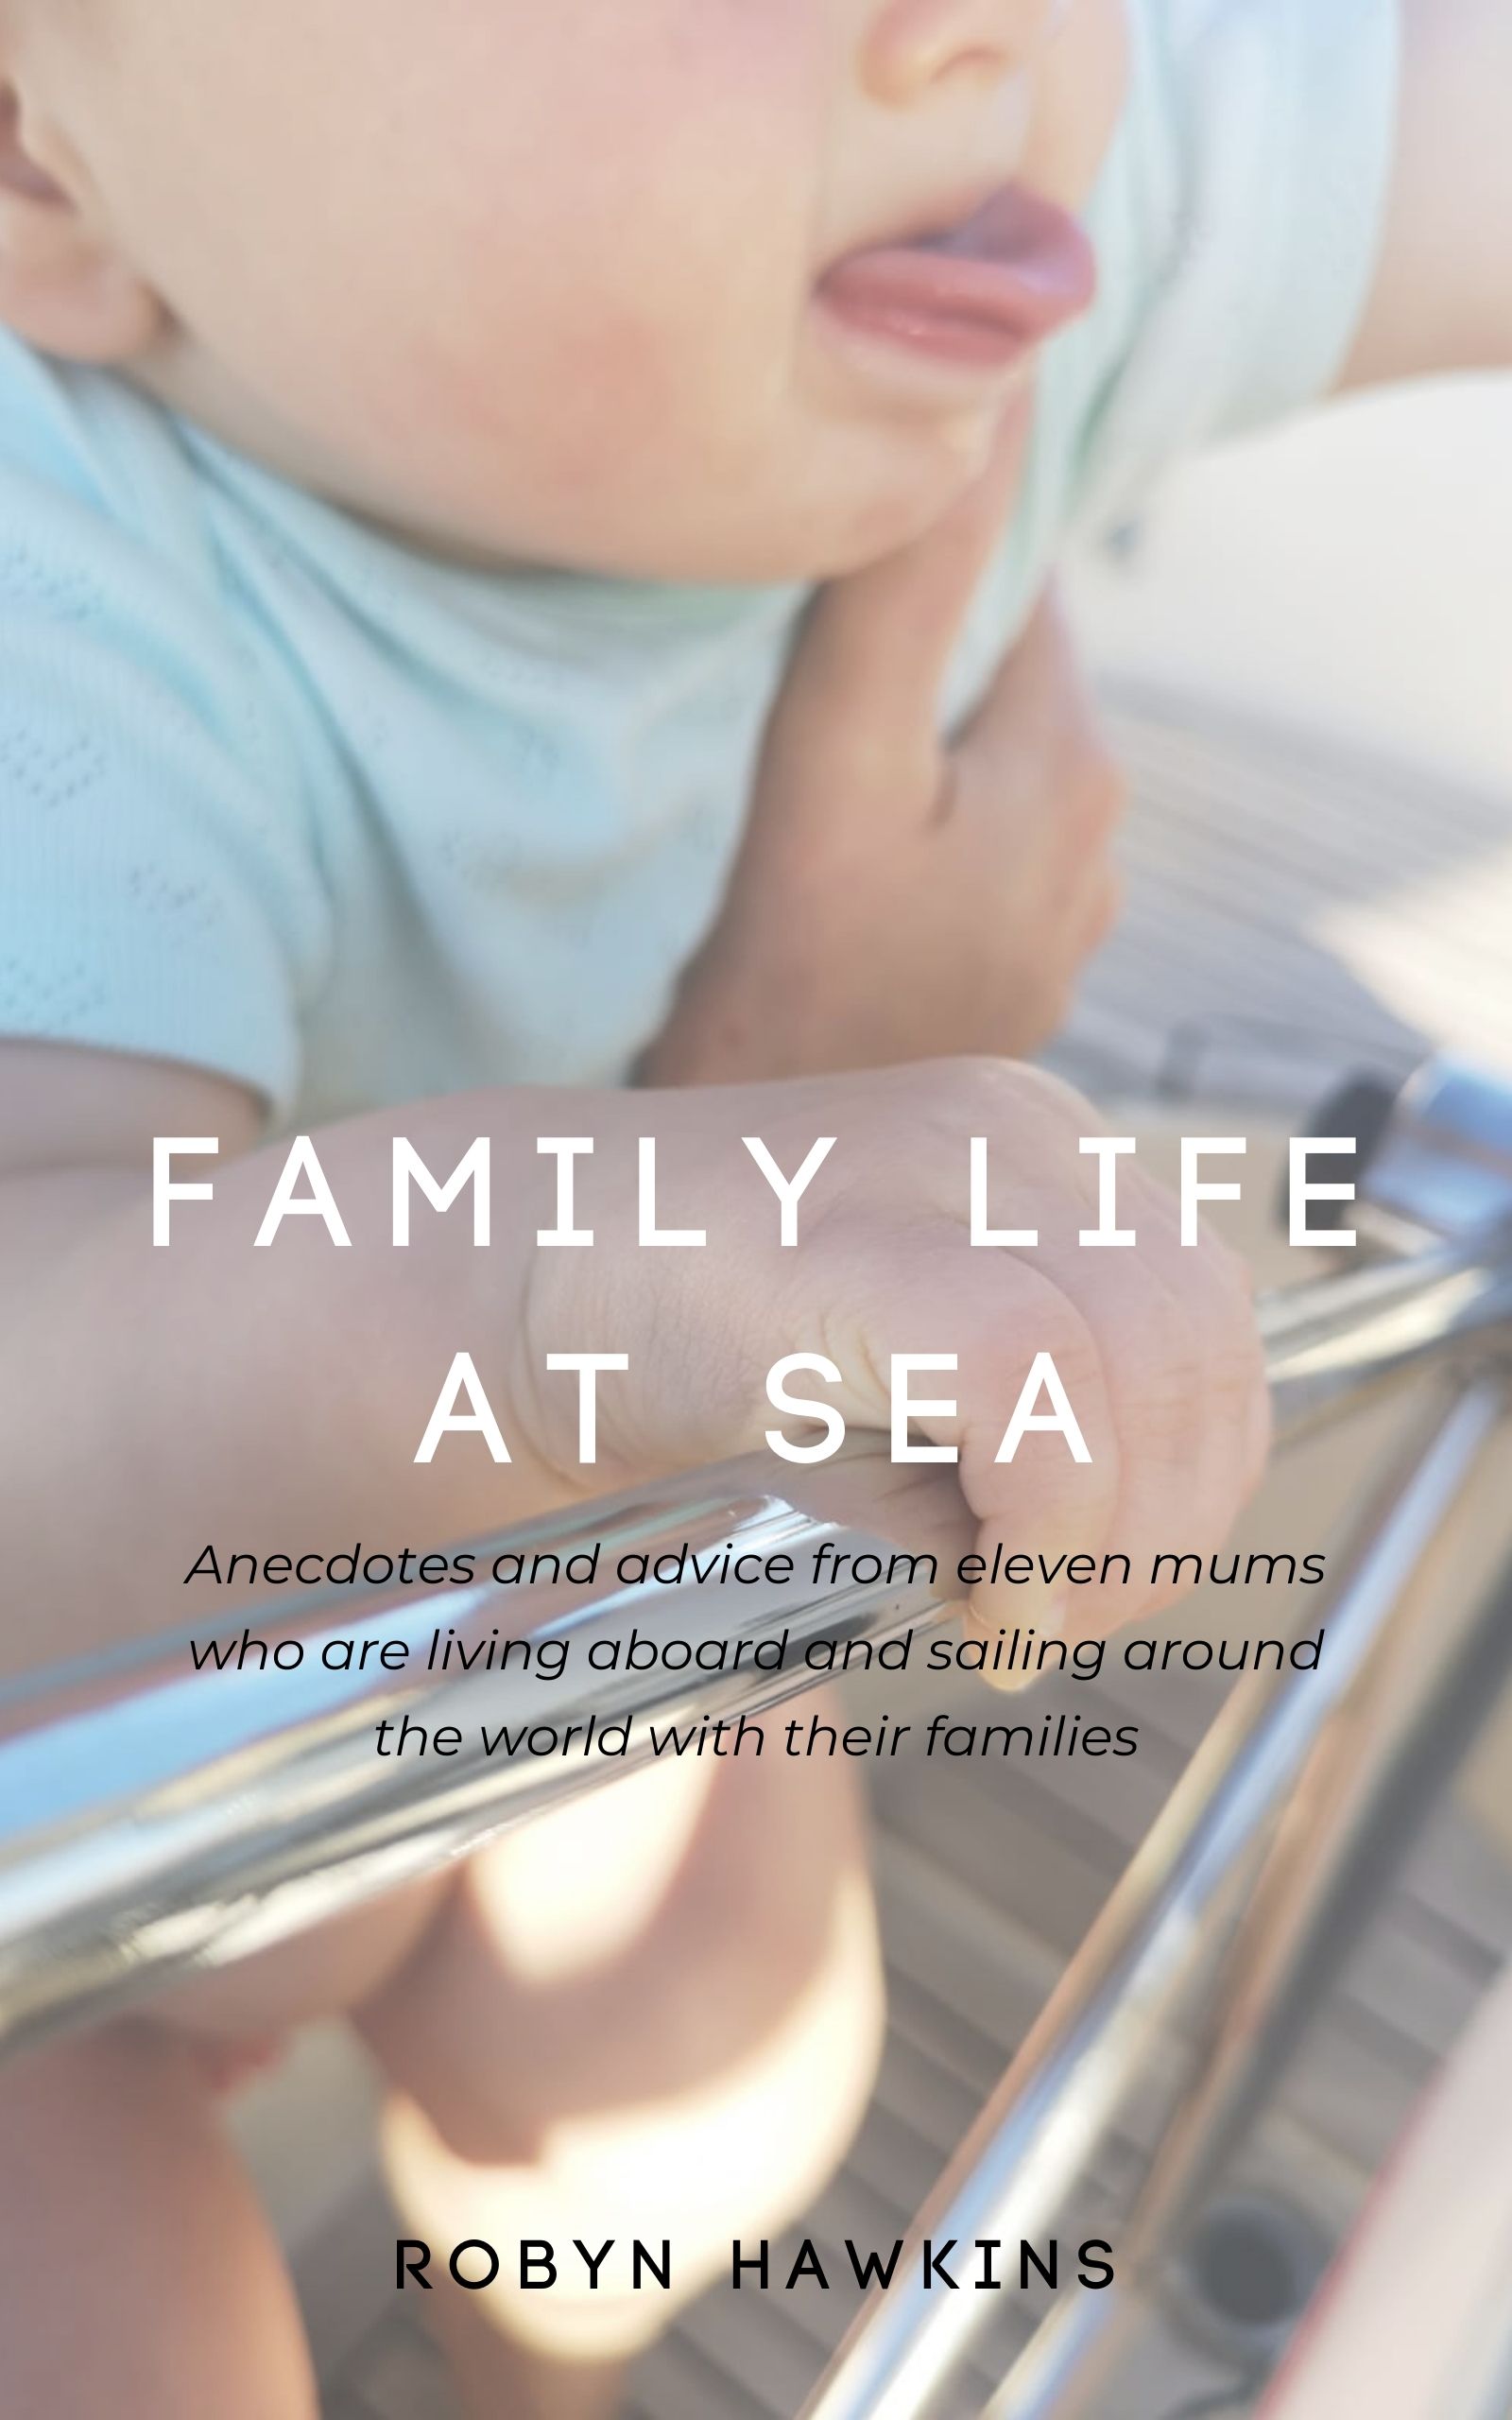 Sailing baby at the helm of a boat. Book cover for Family Life at Sea by Robyn Hawkins